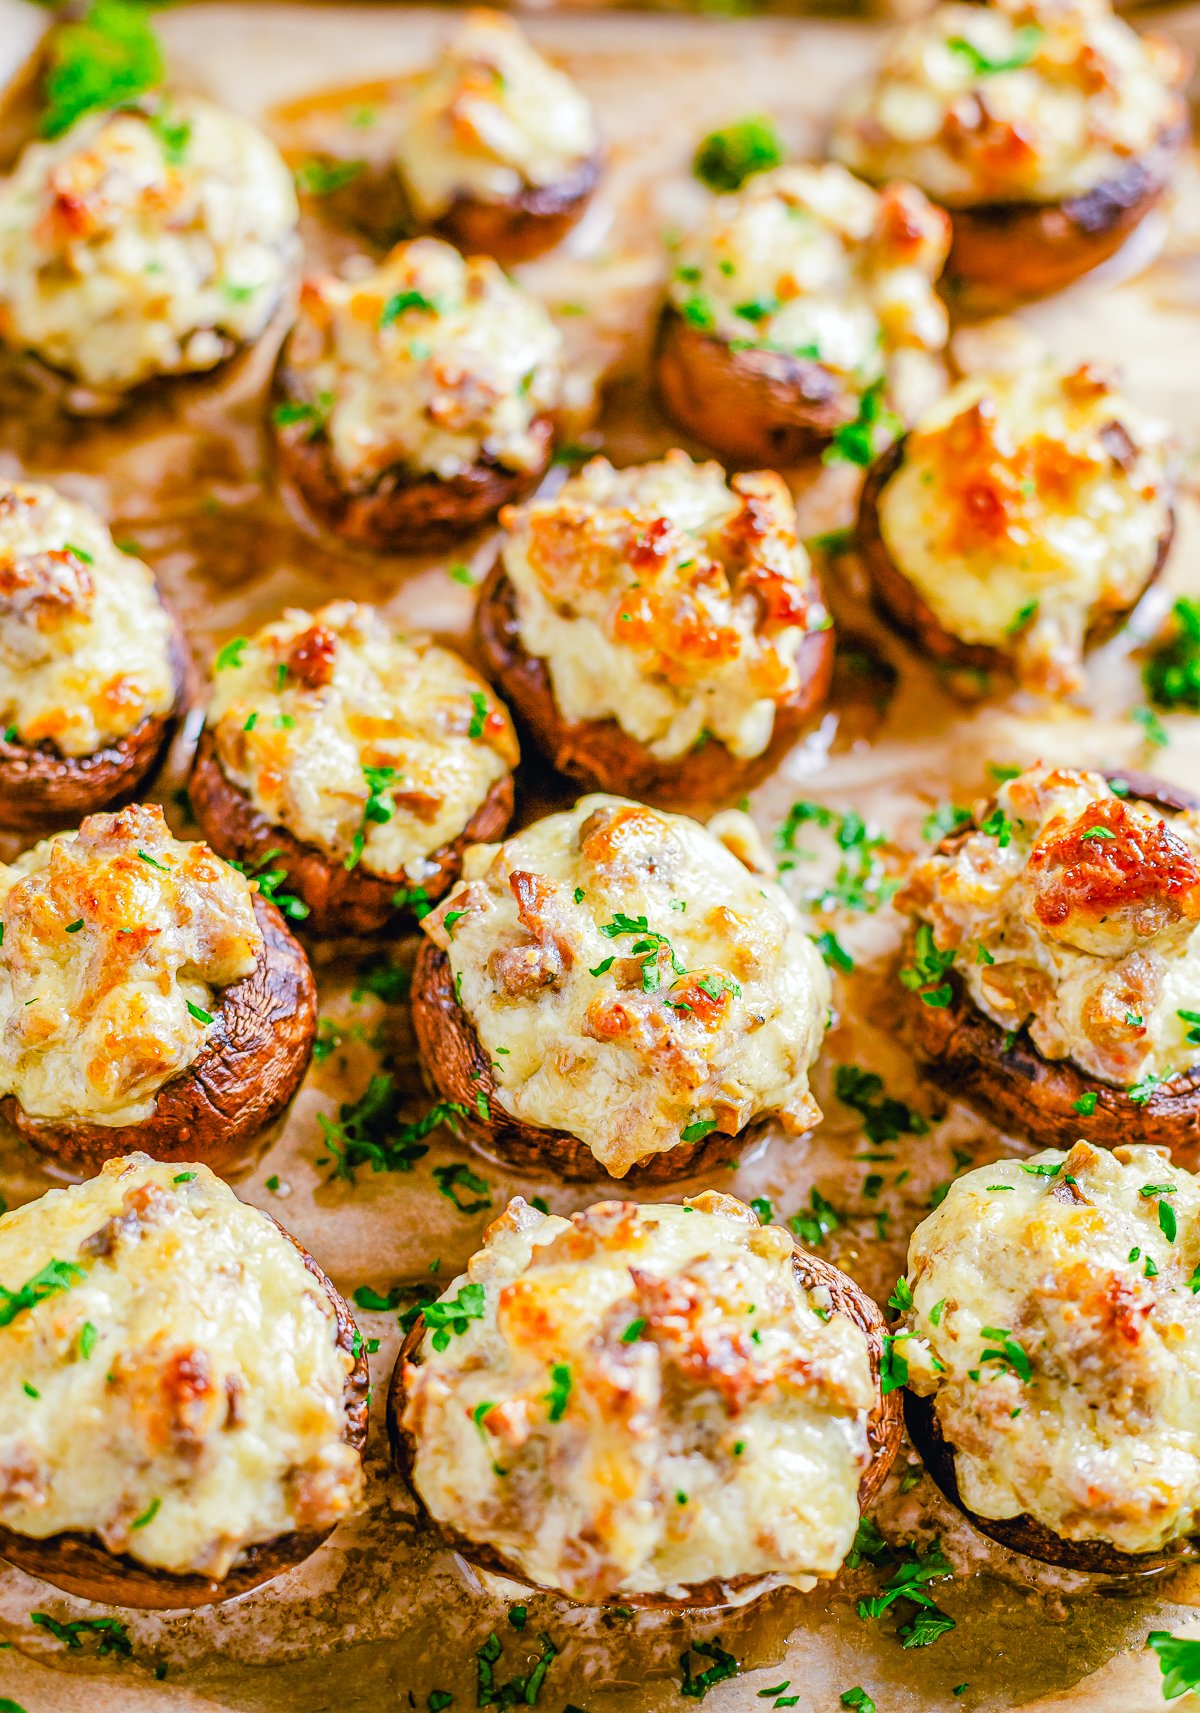 Overhead close up of finished Sausage Stuffed Mushrooms on wooden board.